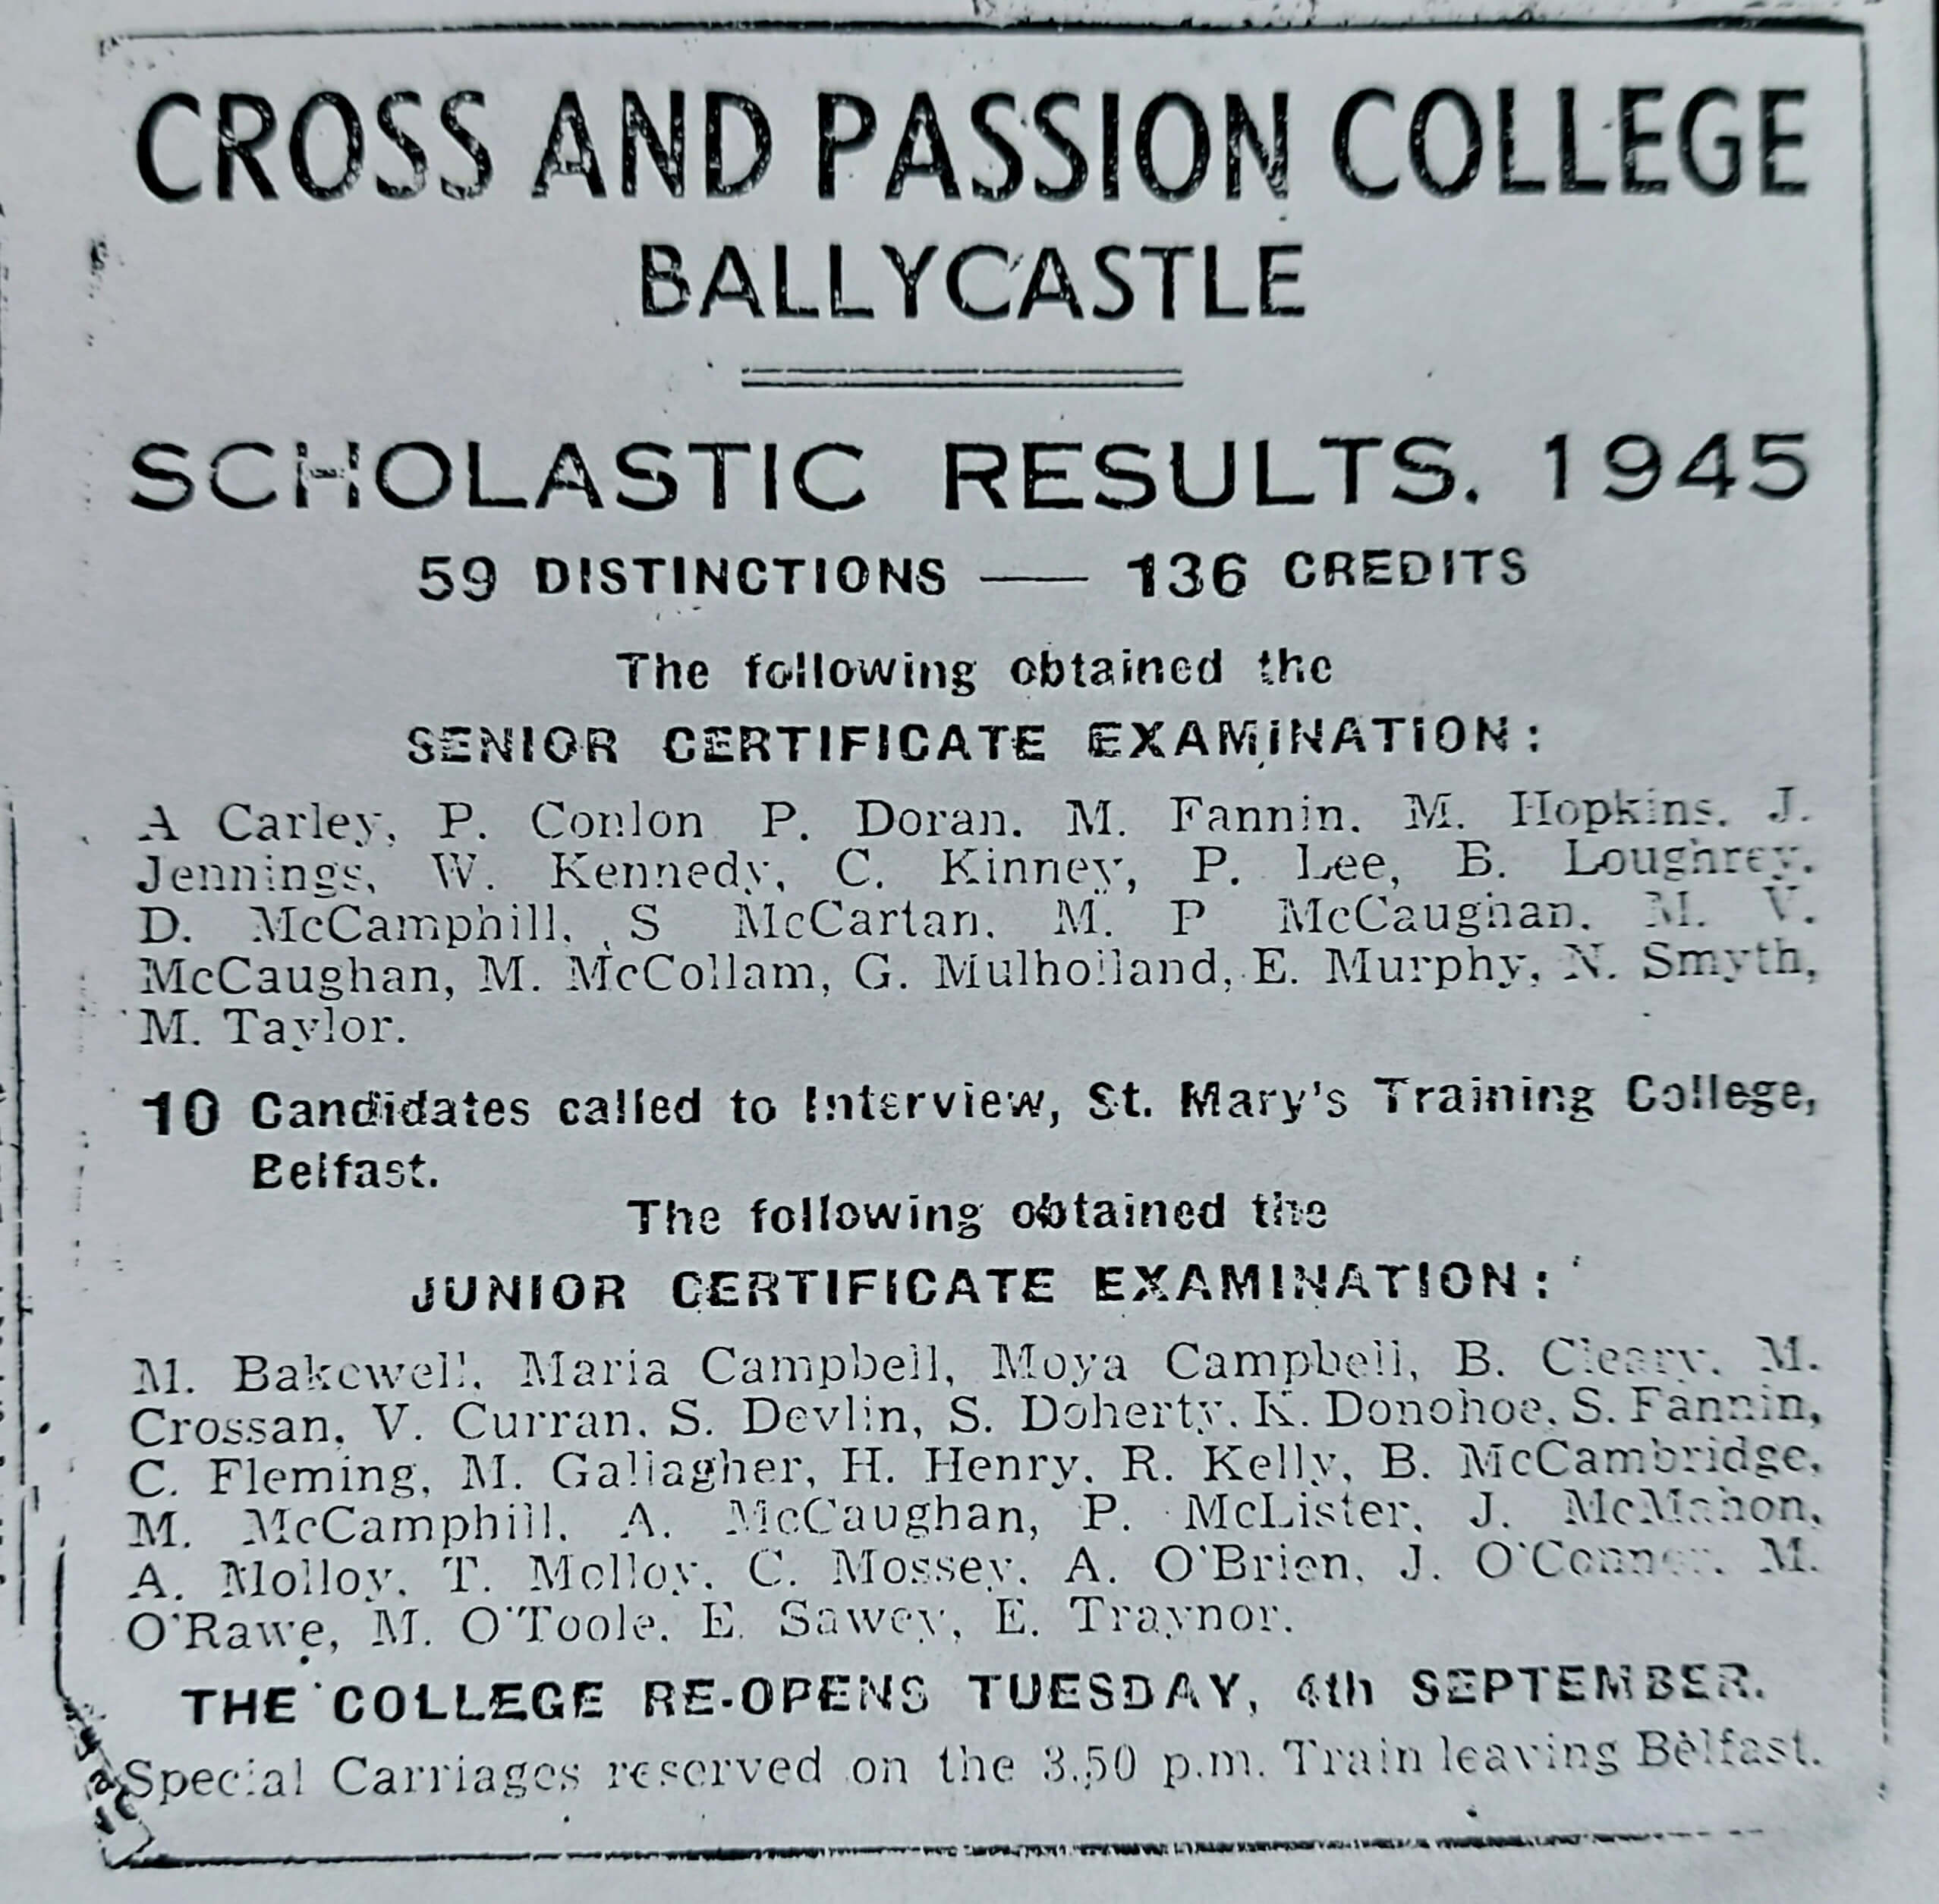 Cross and Passion College Results, Ballycastle, 1945